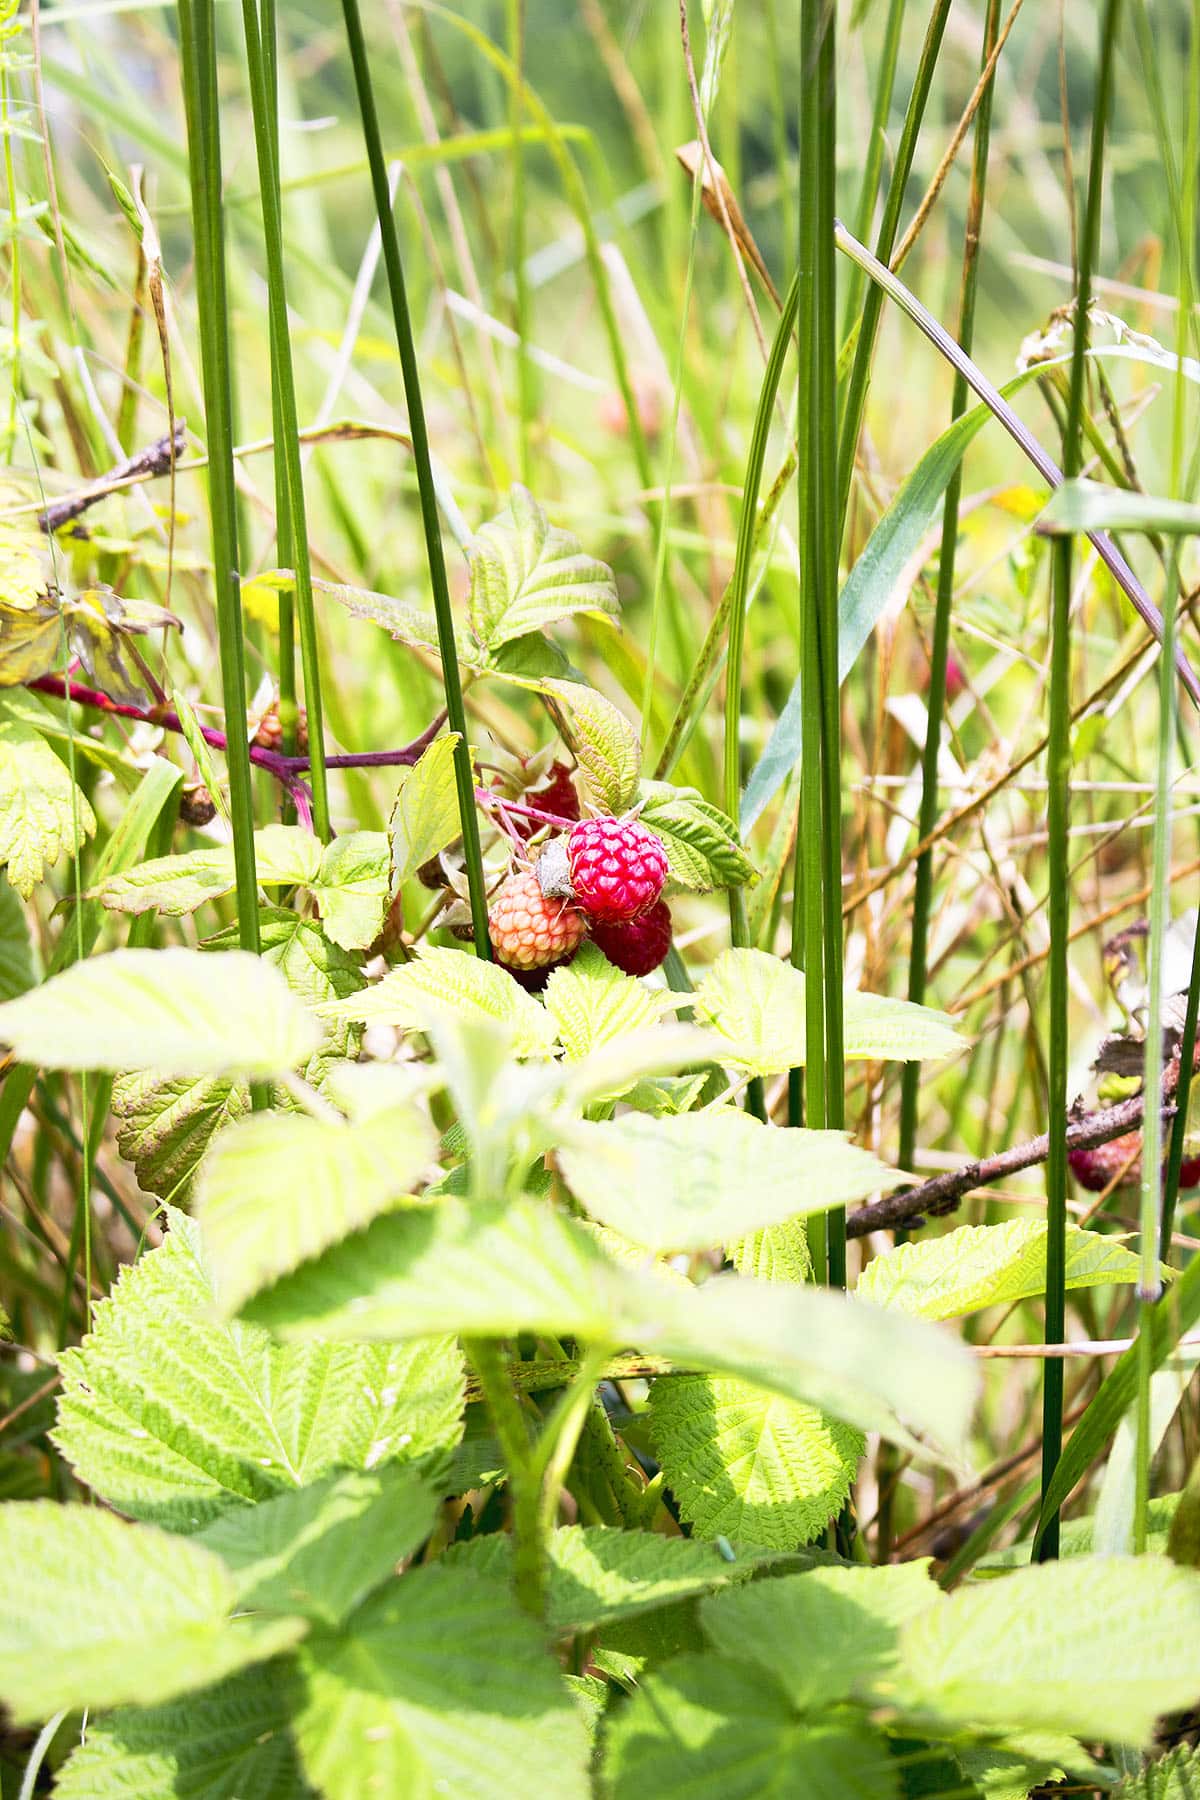 Closeup of plant and raspberry growing in a garden